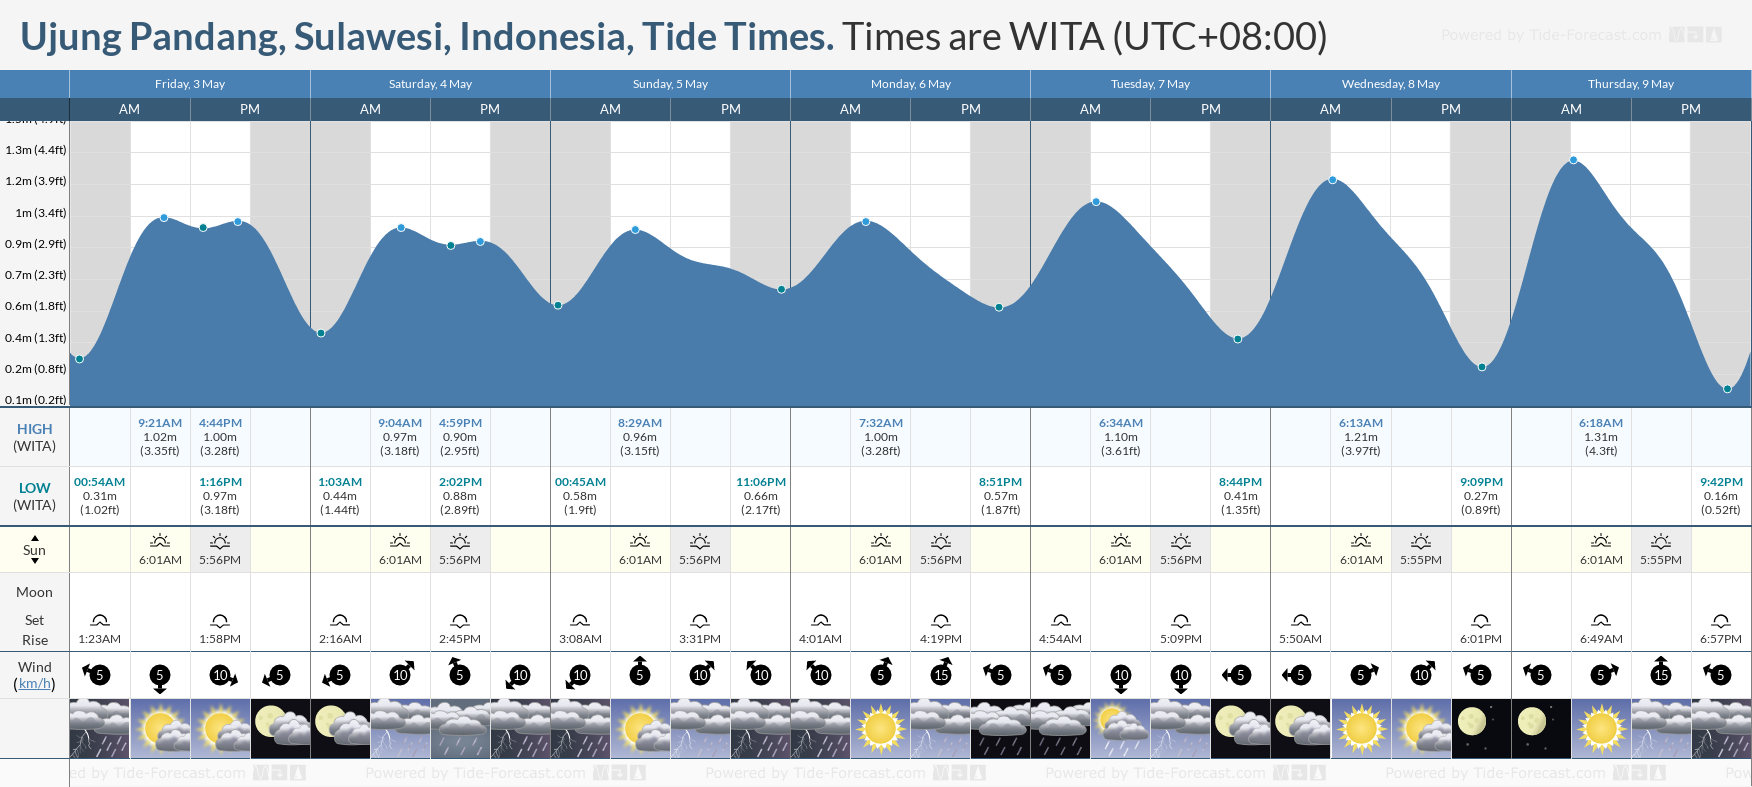 Ujung Pandang, Sulawesi, Indonesia Tide Chart including high and low tide times for the next 7 days